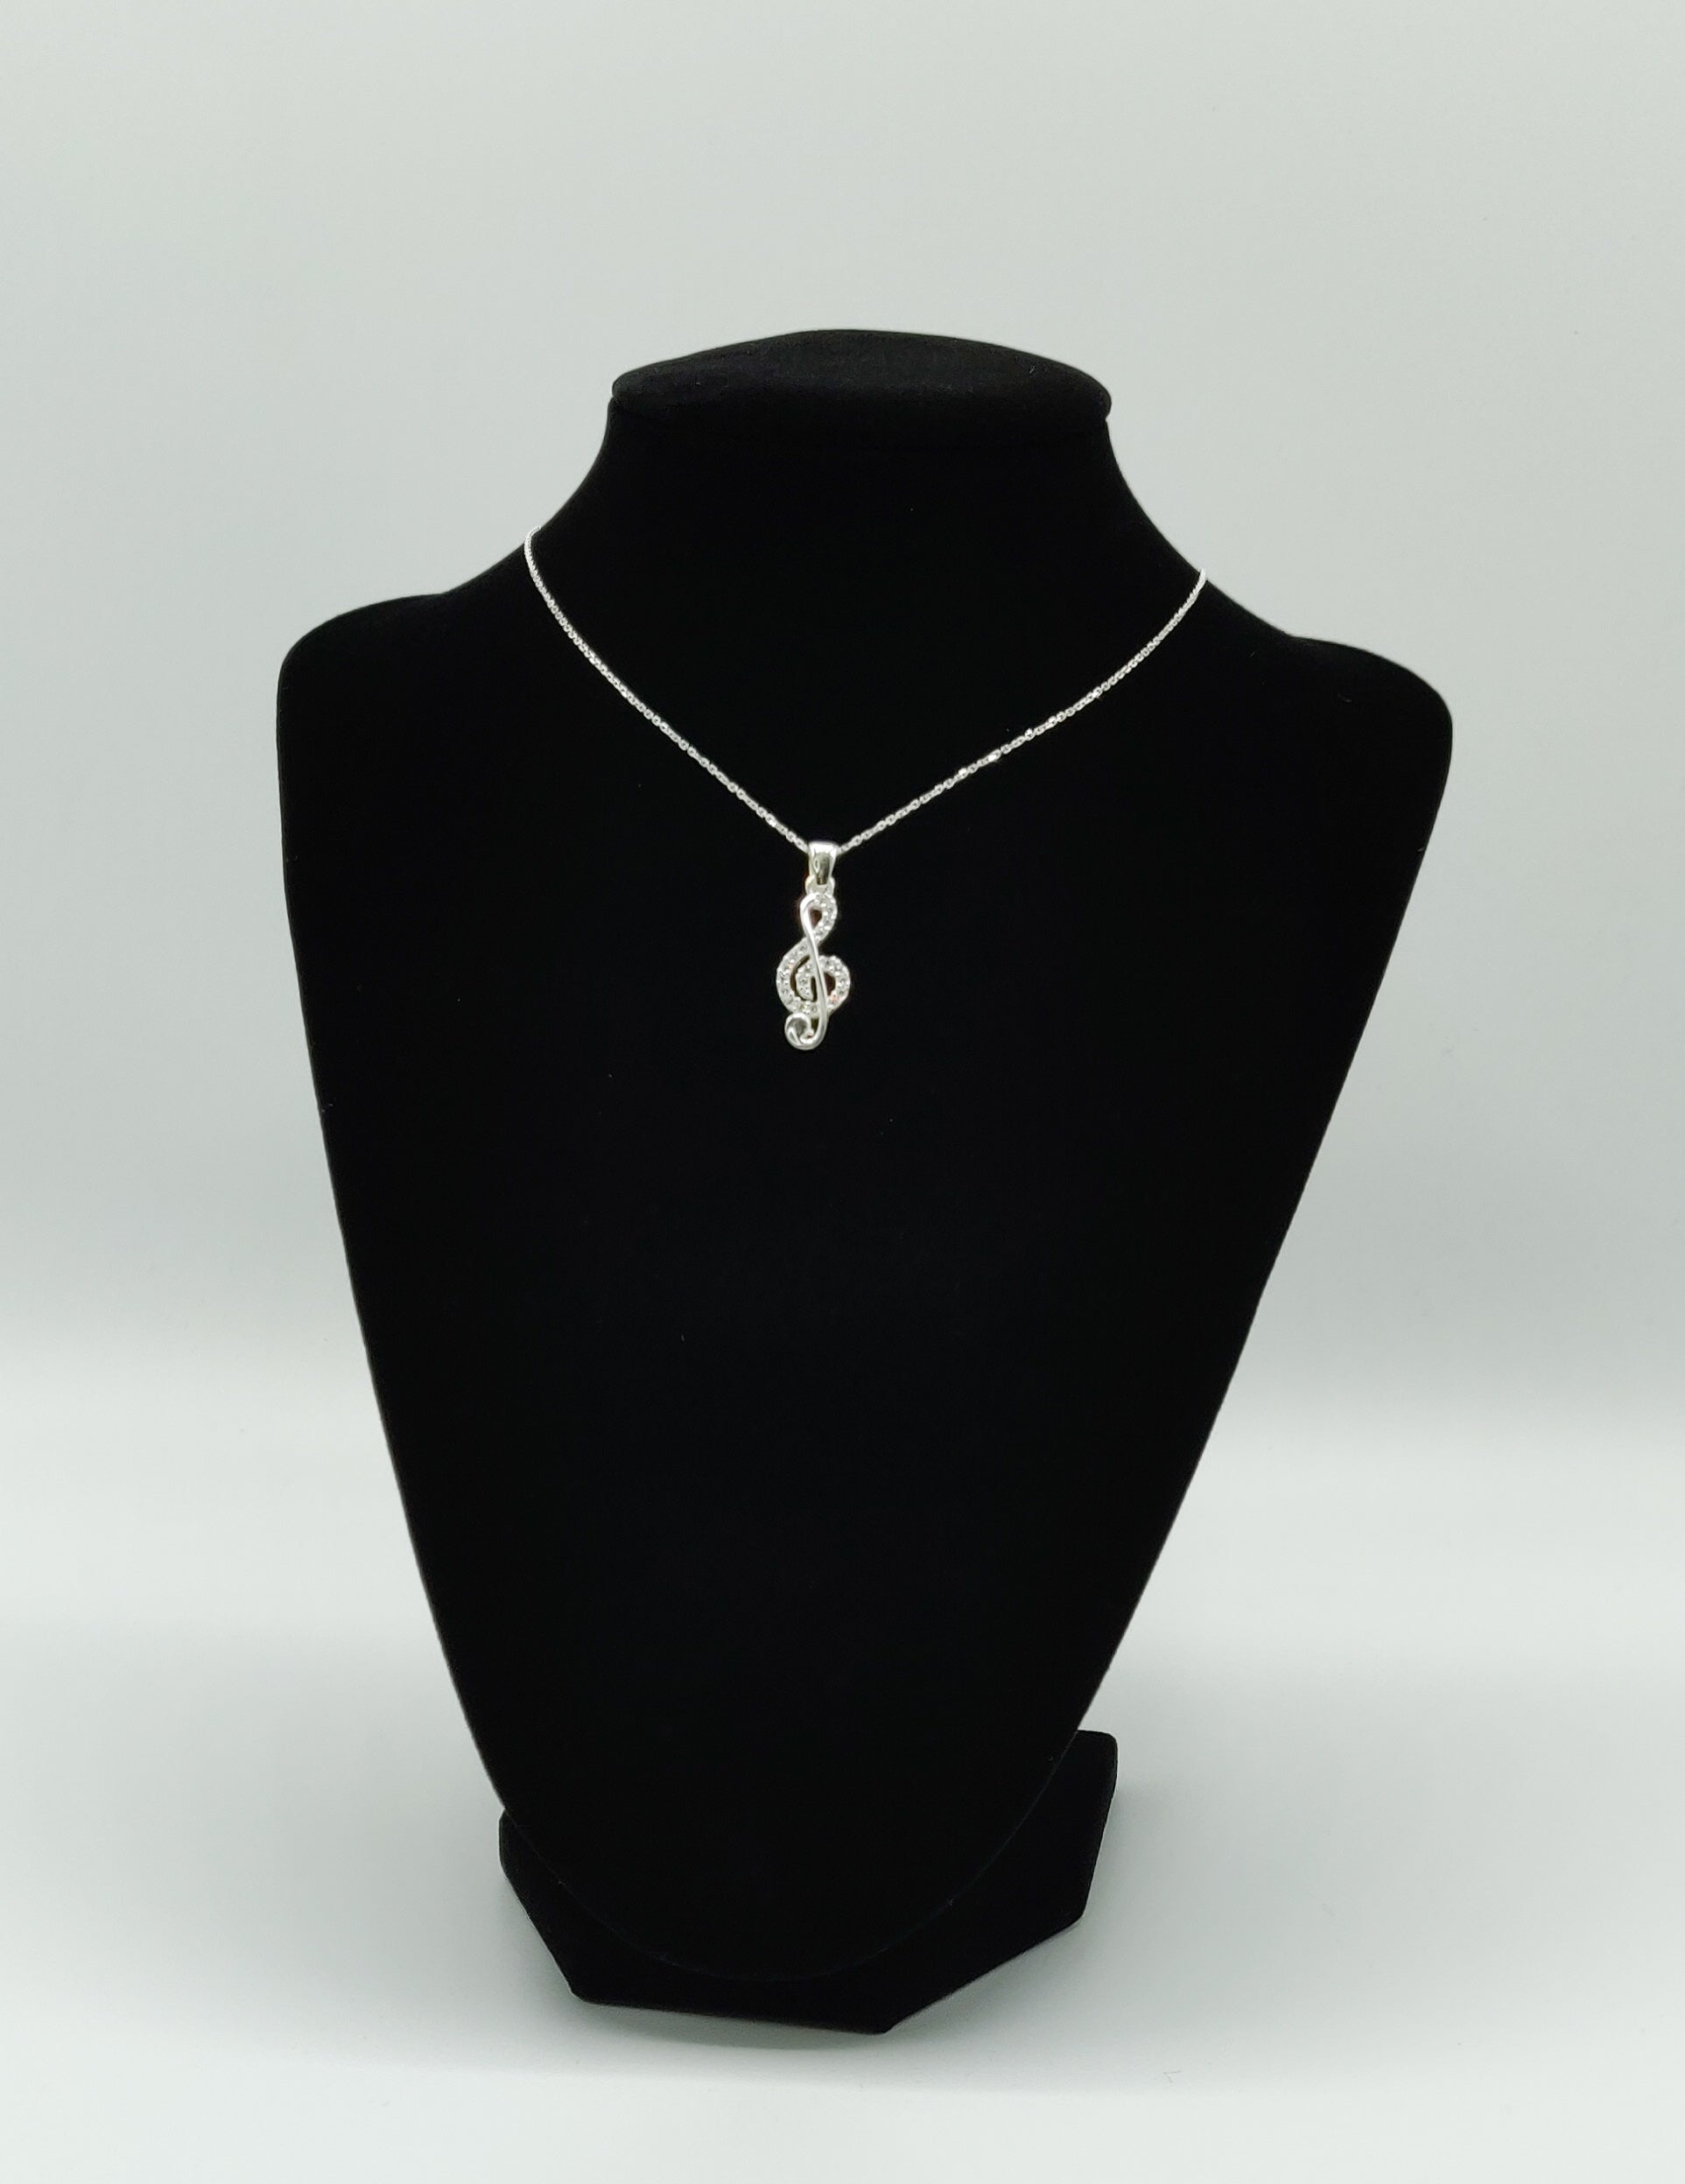 Treble clef silver necklace – sterling silver 925